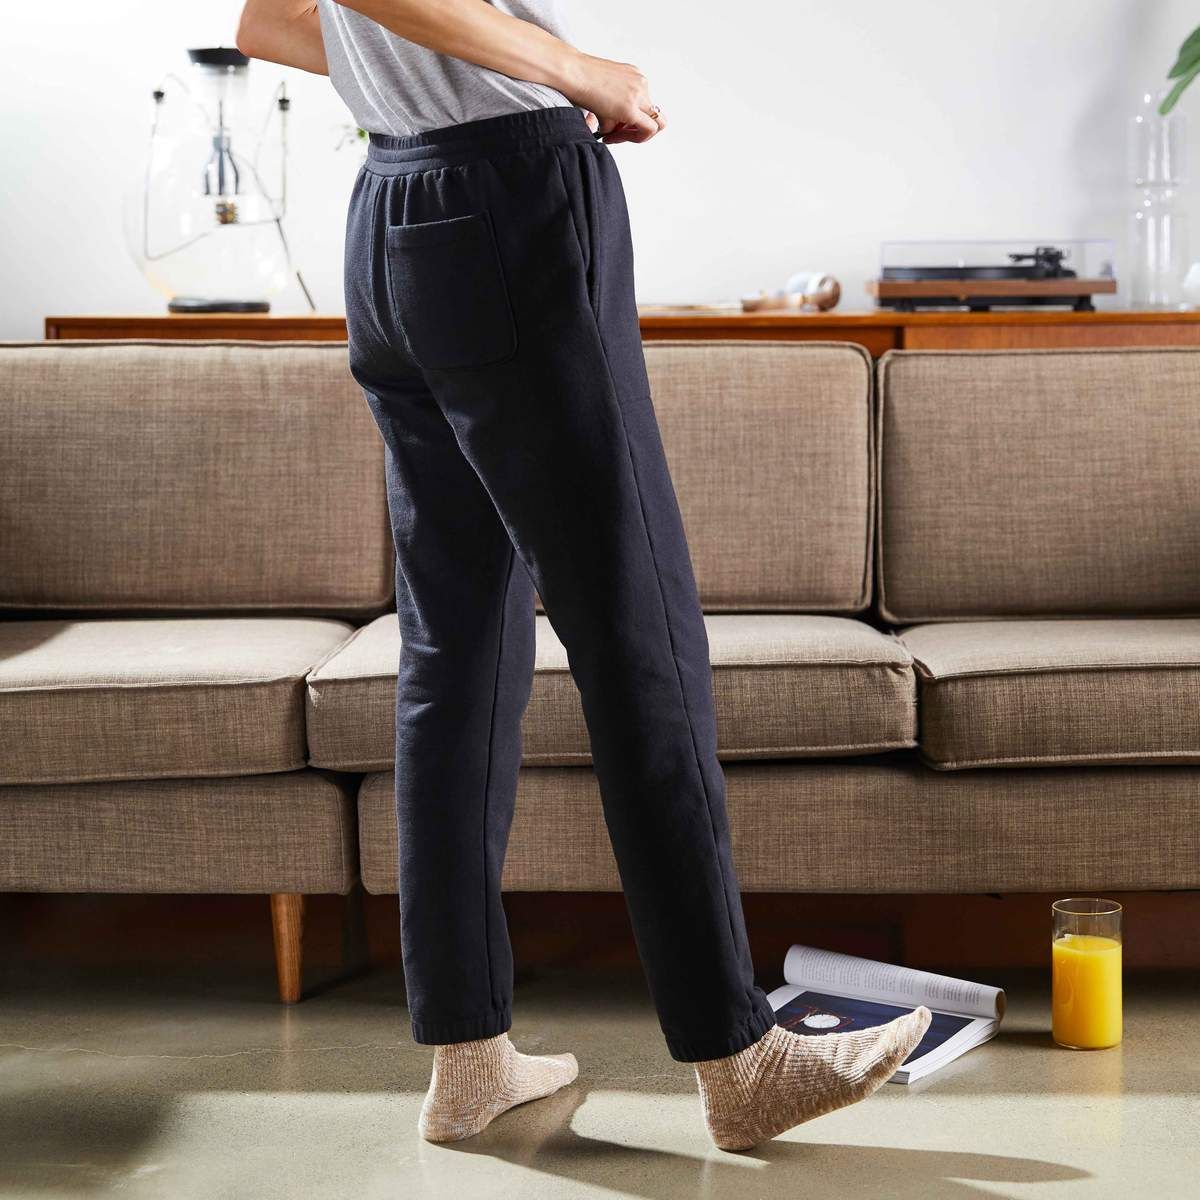 Bed-Stuy Pant